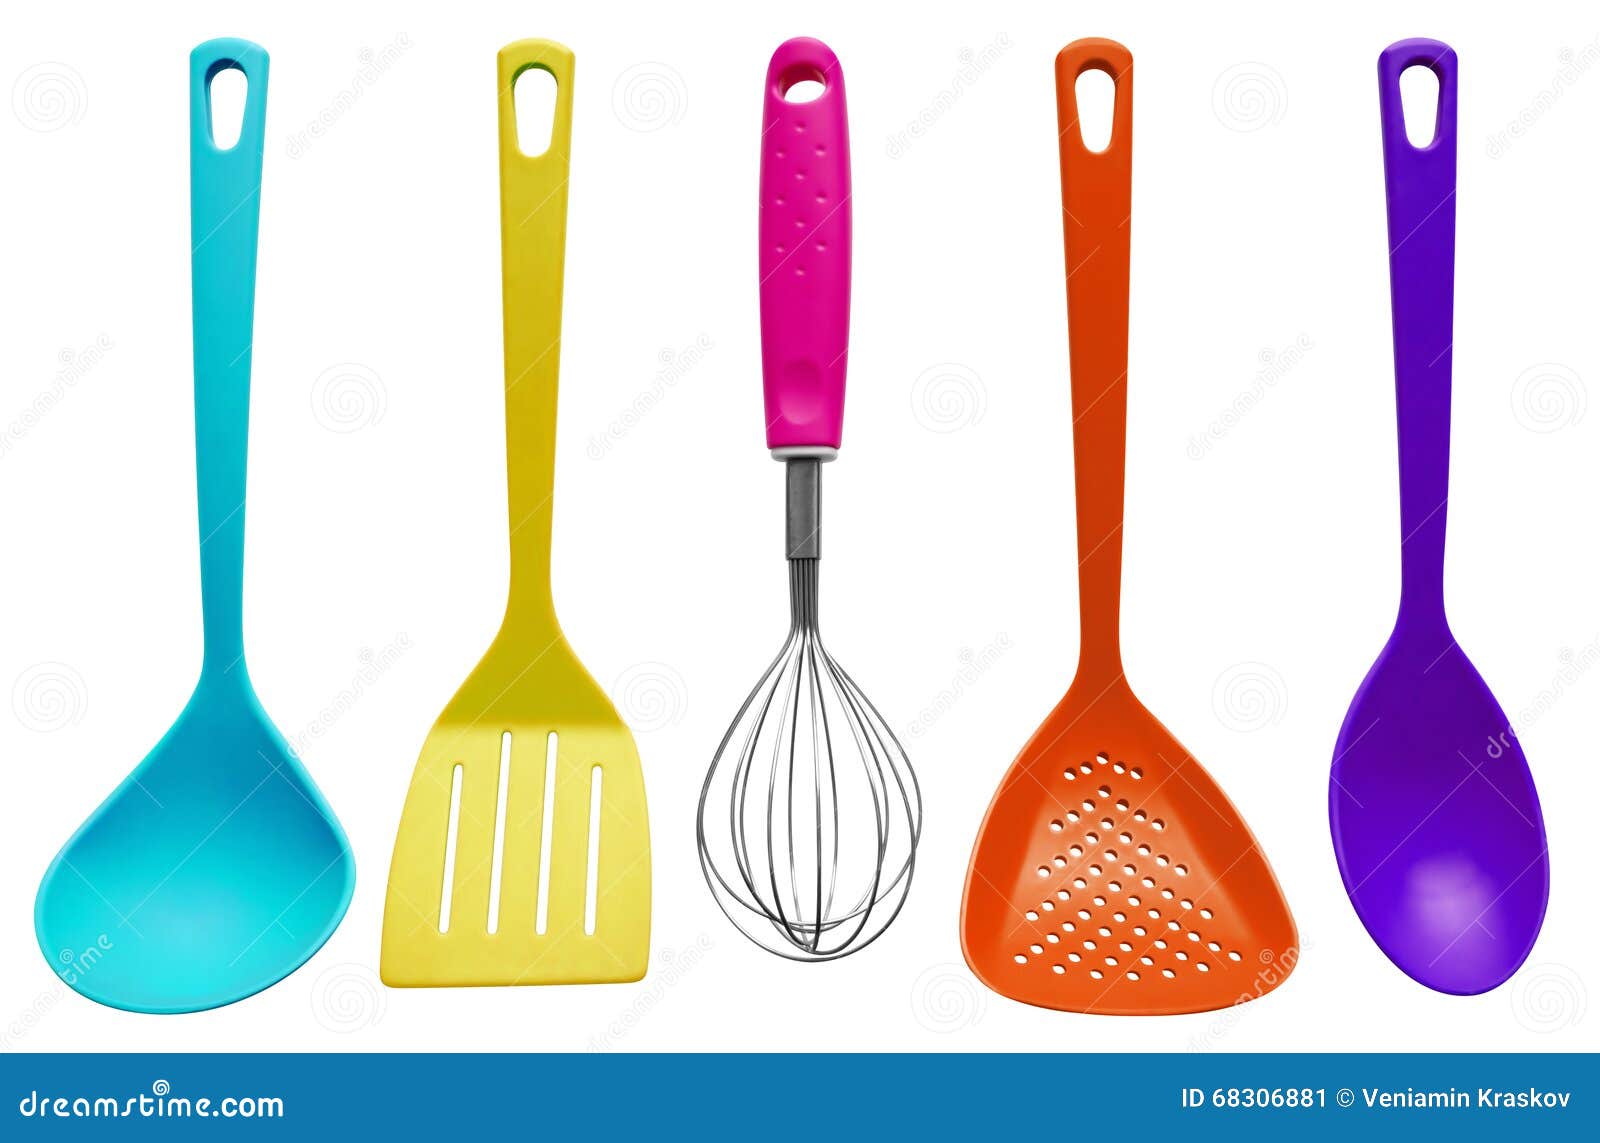 Kitchen Utensils Colorful Plastic Isolated White Clipping Path Included 68306881 